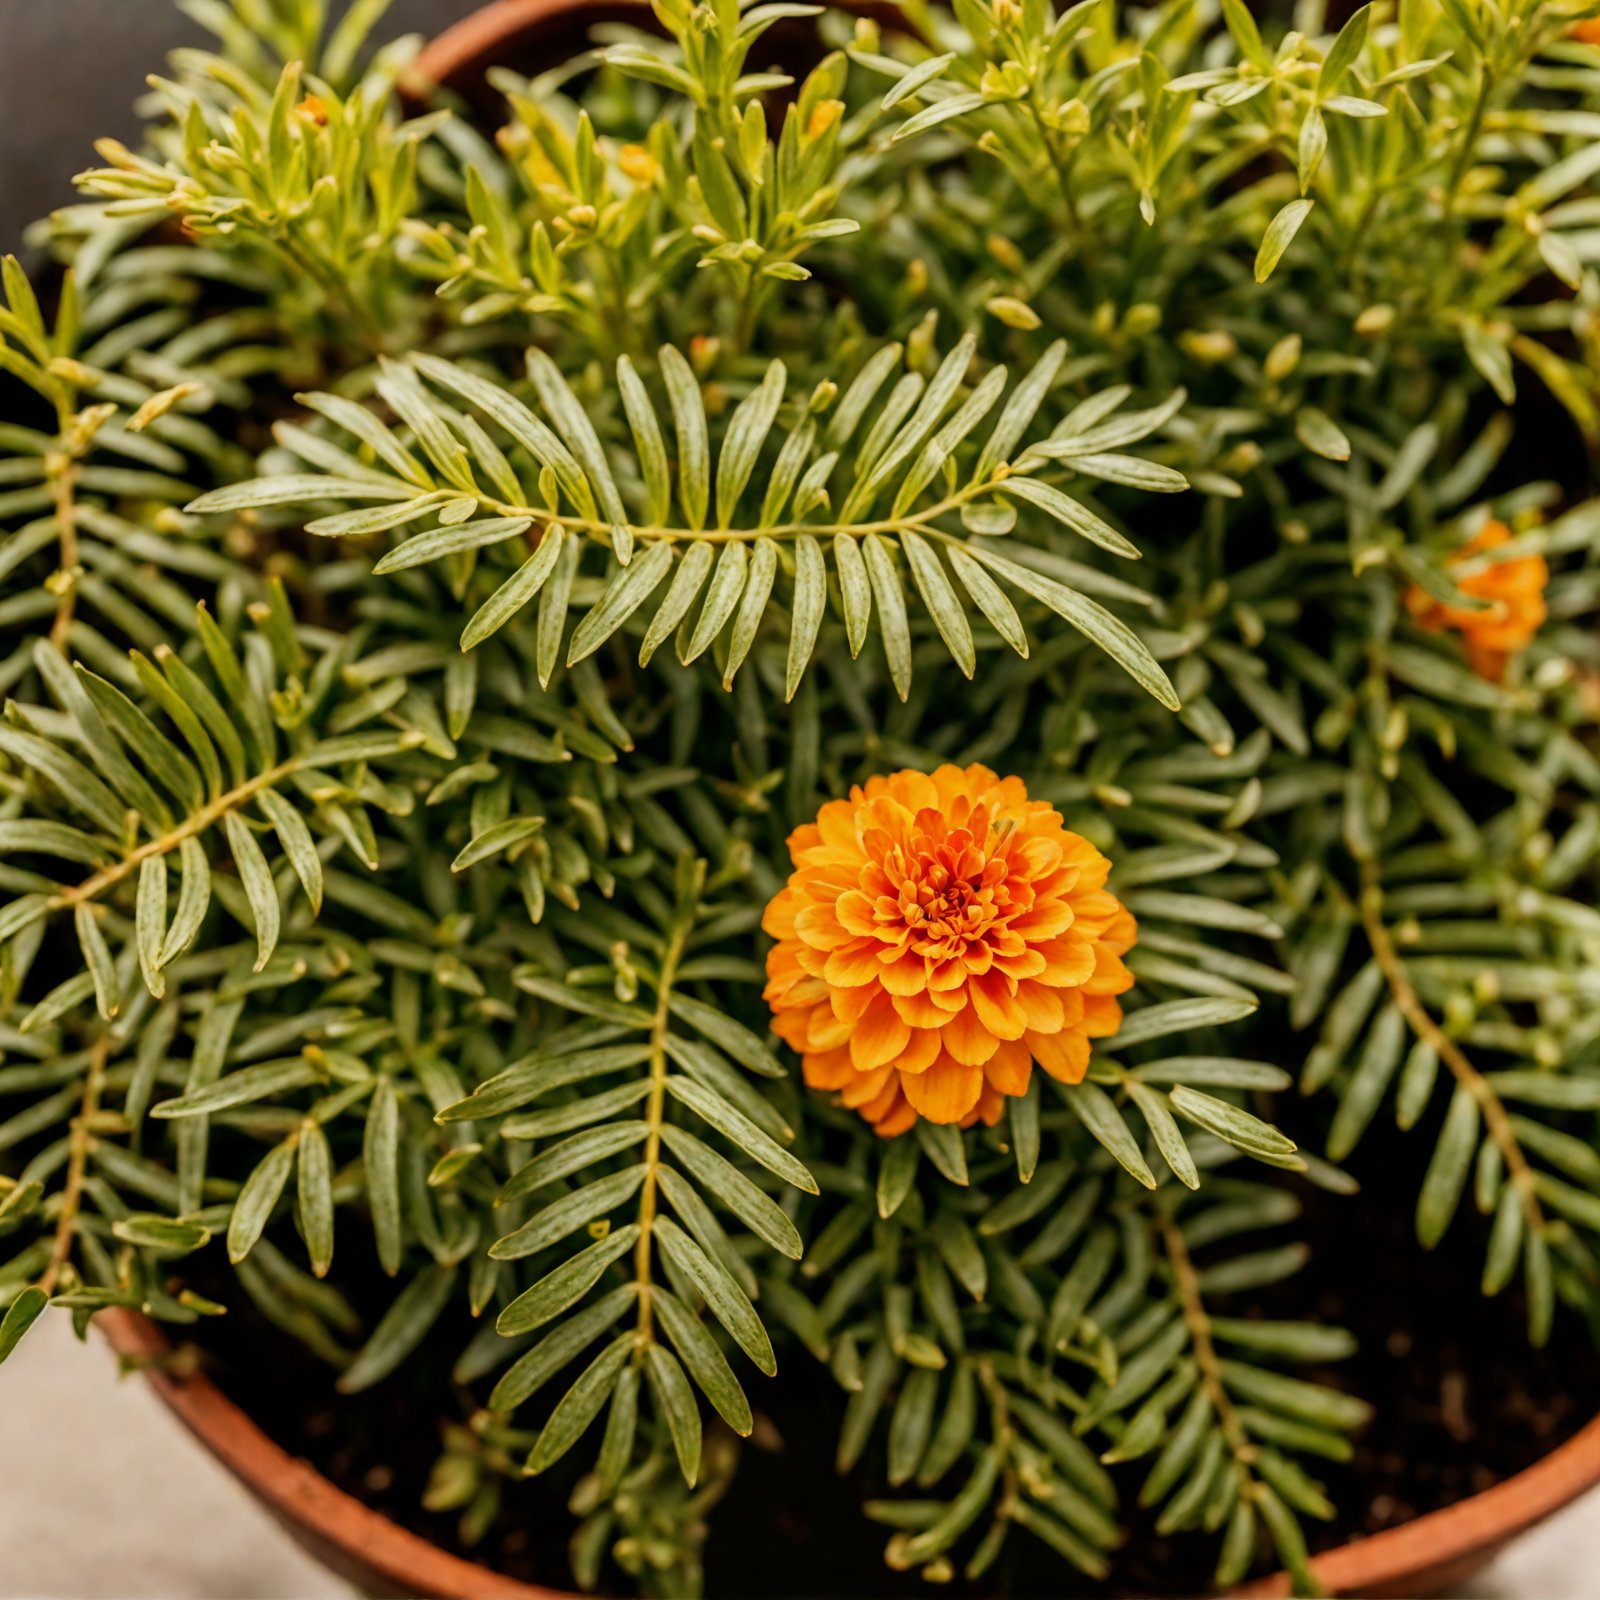 Vibrant yellow Tagetes erecta flowers in a bowl, with foliage in the dark background, clear indoor lighting.